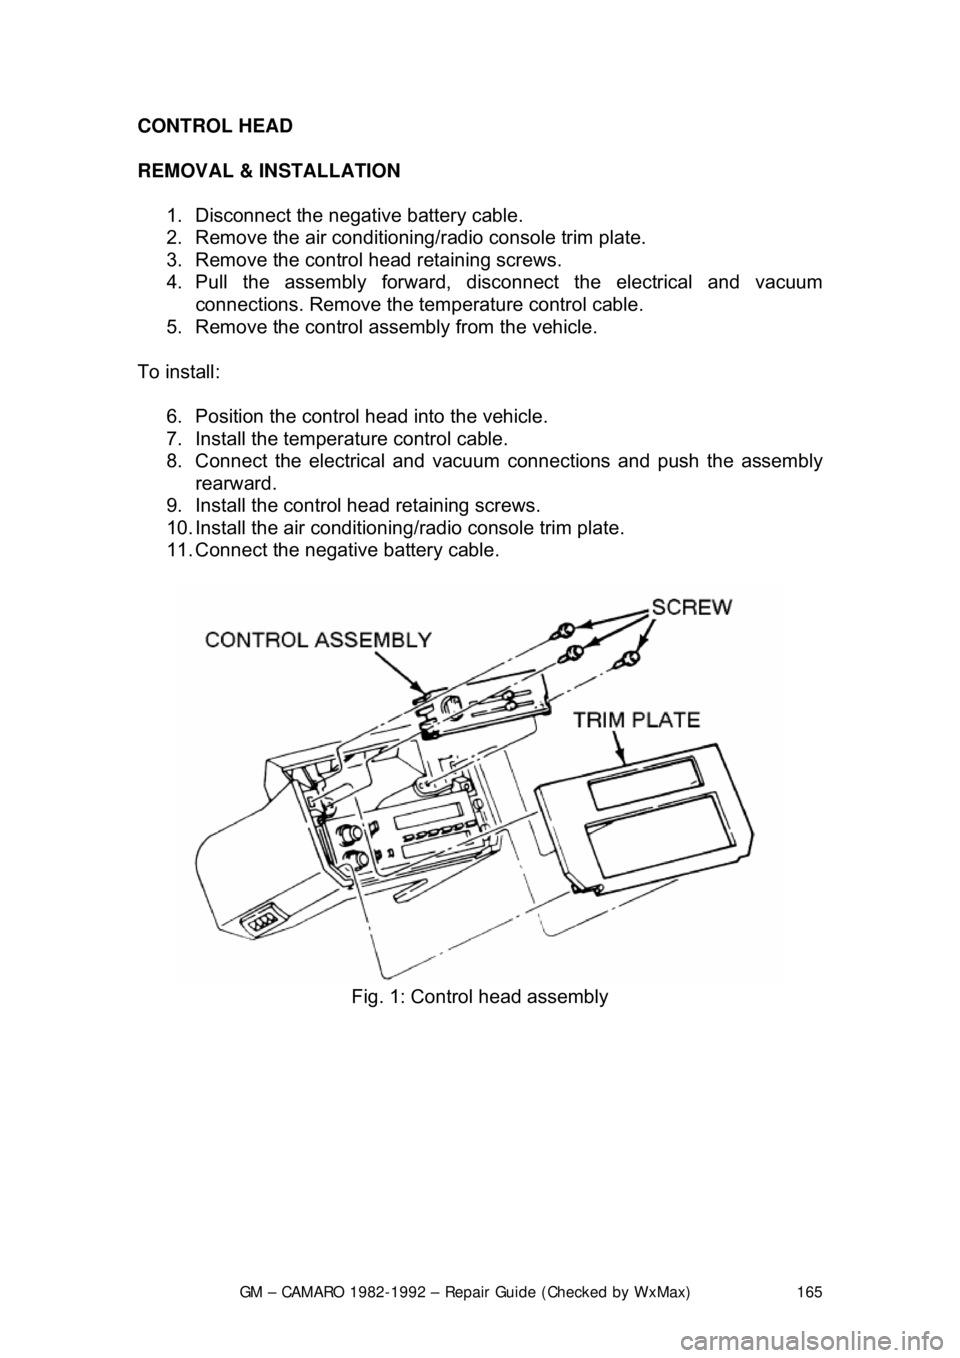 CHEVROLET CAMARO 1982  Repair Guide 
GM – CAMARO 1982-1992 – Repair Guide (Checked by WxMax) 165
CONTROL HEAD 
REMOVAL & INSTALLATION  
1.  Disconnect the negative battery cable.  
2.  Remove the air conditioning/ radio console trim